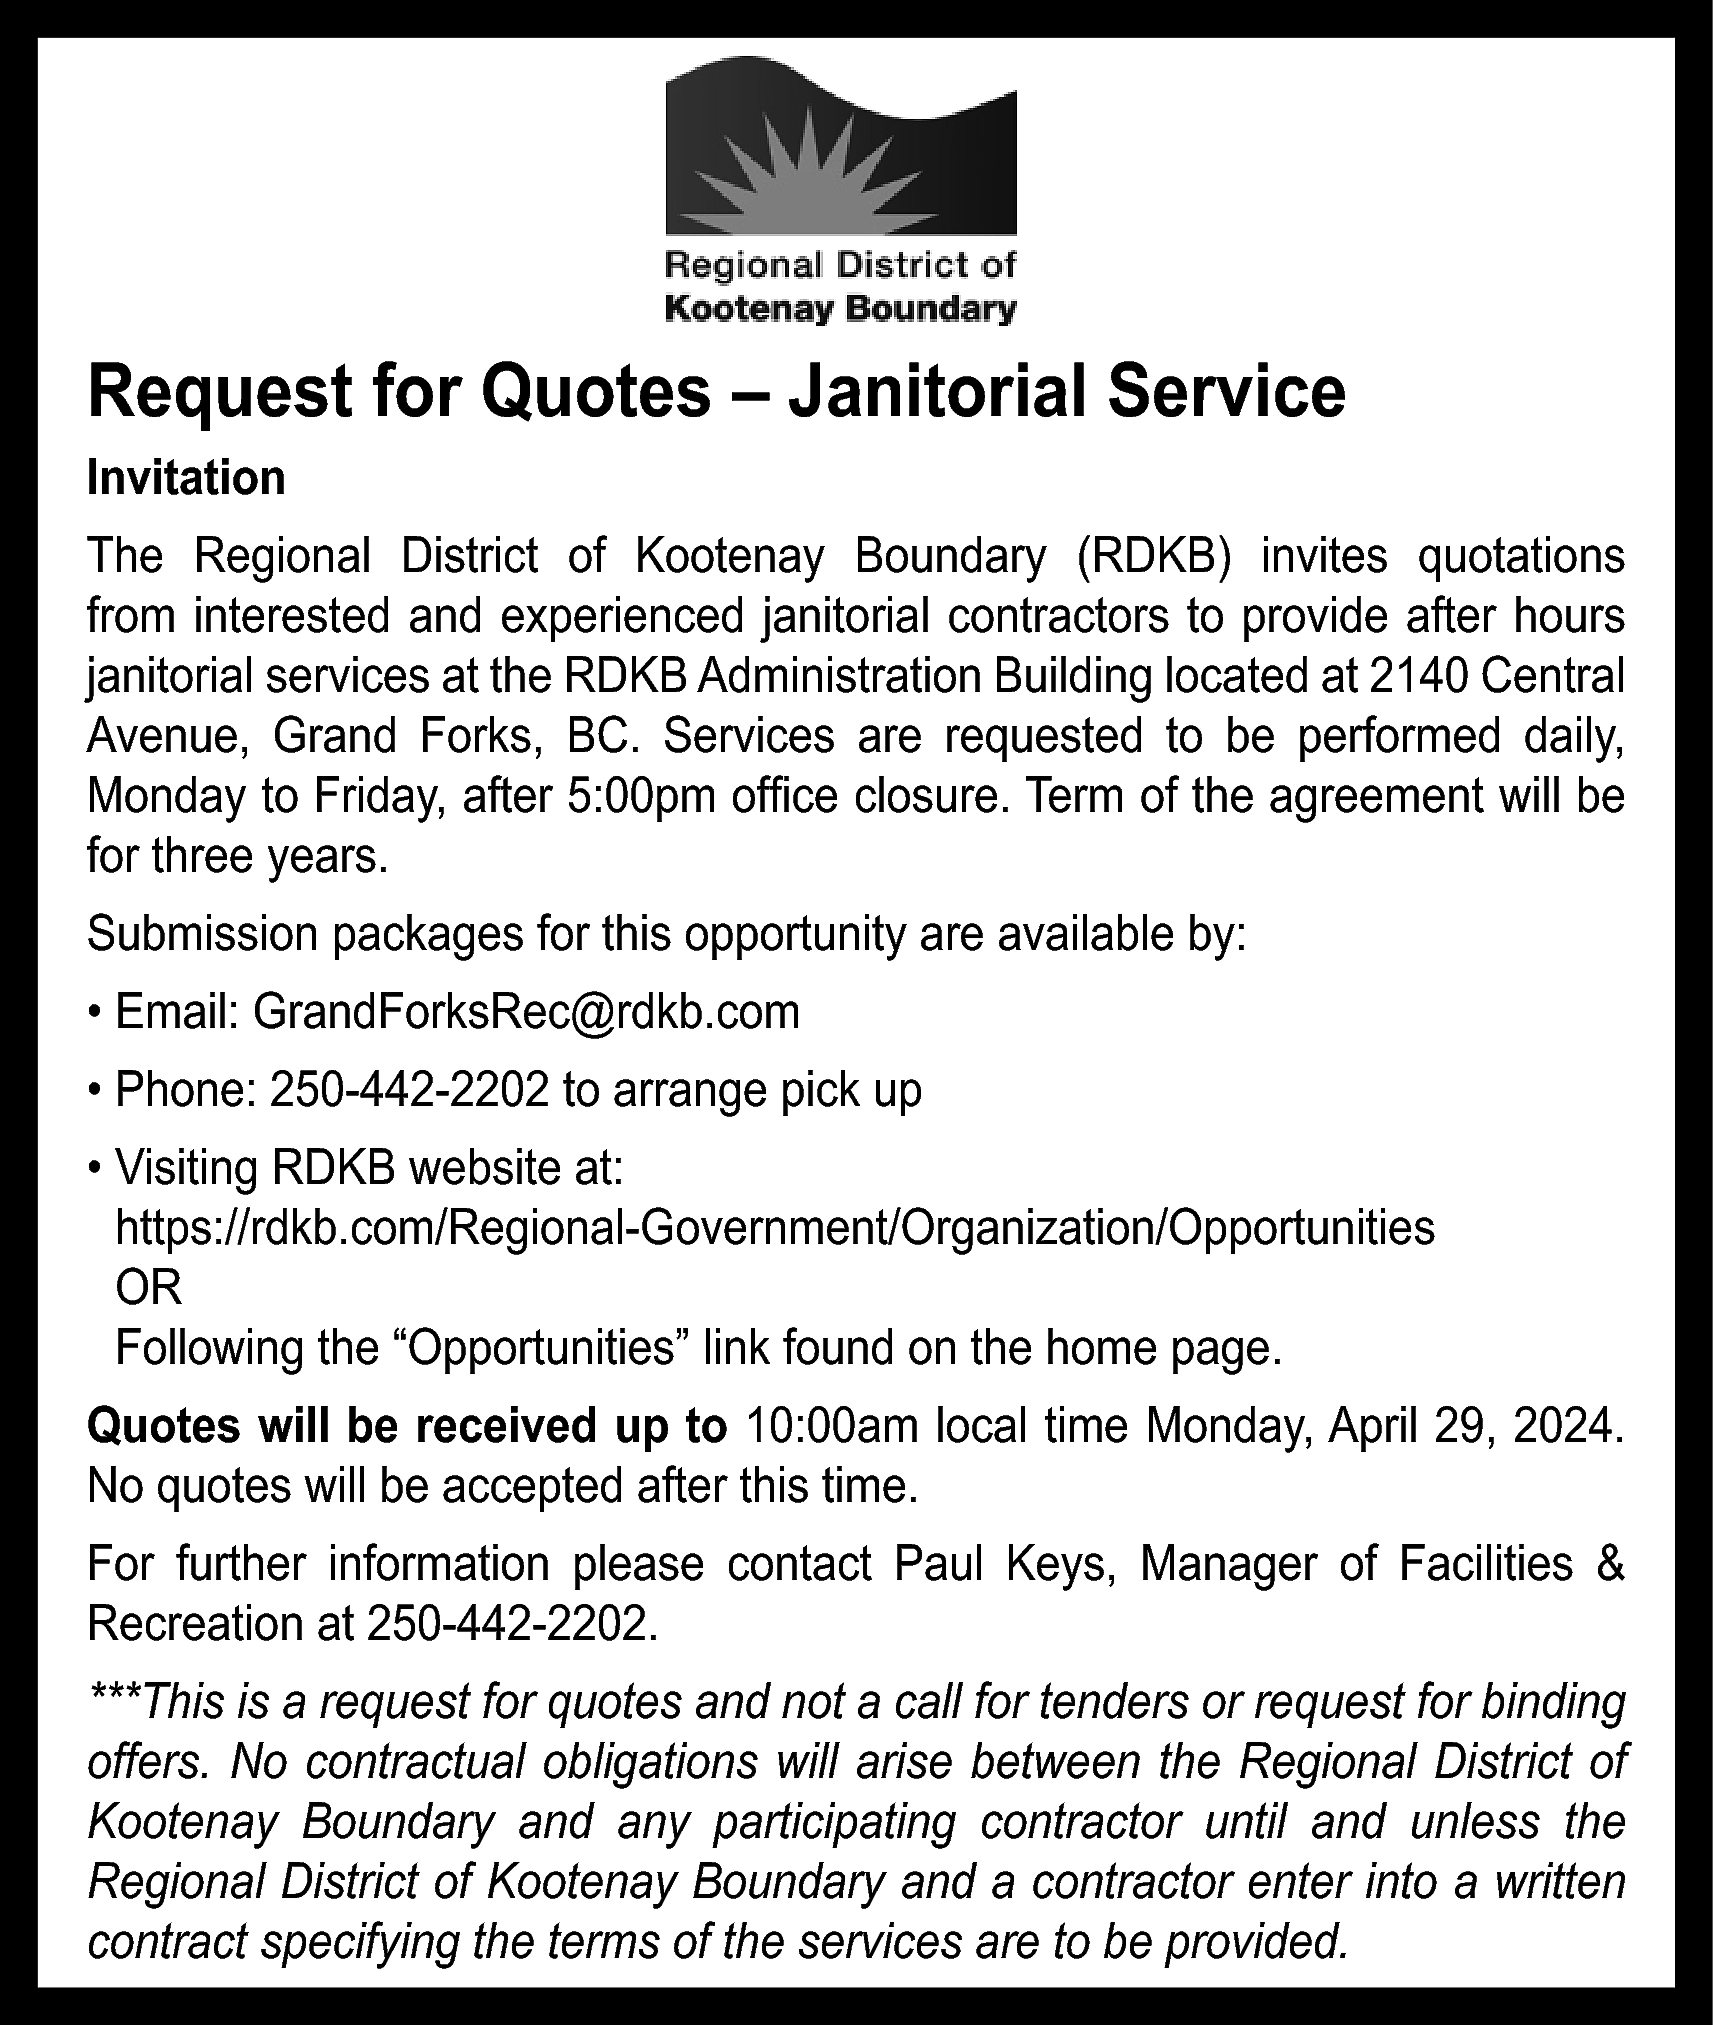 Request for Quotes – Janitorial  Request for Quotes – Janitorial Service  Invitation  The Regional District of Kootenay Boundary (RDKB) invites quotations  from interested and experienced janitorial contractors to provide after hours  janitorial services at the RDKB Administration Building located at 2140 Central  Avenue, Grand Forks, BC. Services are requested to be performed daily,  Monday to Friday, after 5:00pm office closure. Term of the agreement will be  for three years.  Submission packages for this opportunity are available by:  • Email: GrandForksRec@rdkb.com  • Phone: 250-442-2202 to arrange pick up  • Visiting RDKB website at:  https://rdkb.com/Regional-Government/Organization/Opportunities  OR  Following the “Opportunities” link found on the home page.  Quotes will be received up to 10:00am local time Monday, April 29, 2024.  No quotes will be accepted after this time.  For further information please contact Paul Keys, Manager of Facilities &  Recreation at 250-442-2202.  ***This is a request for quotes and not a call for tenders or request for binding  offers. No contractual obligations will arise between the Regional District of  Kootenay Boundary and any participating contractor until and unless the  Regional District of Kootenay Boundary and a contractor enter into a written  contract specifying the terms of the services are to be provided.    